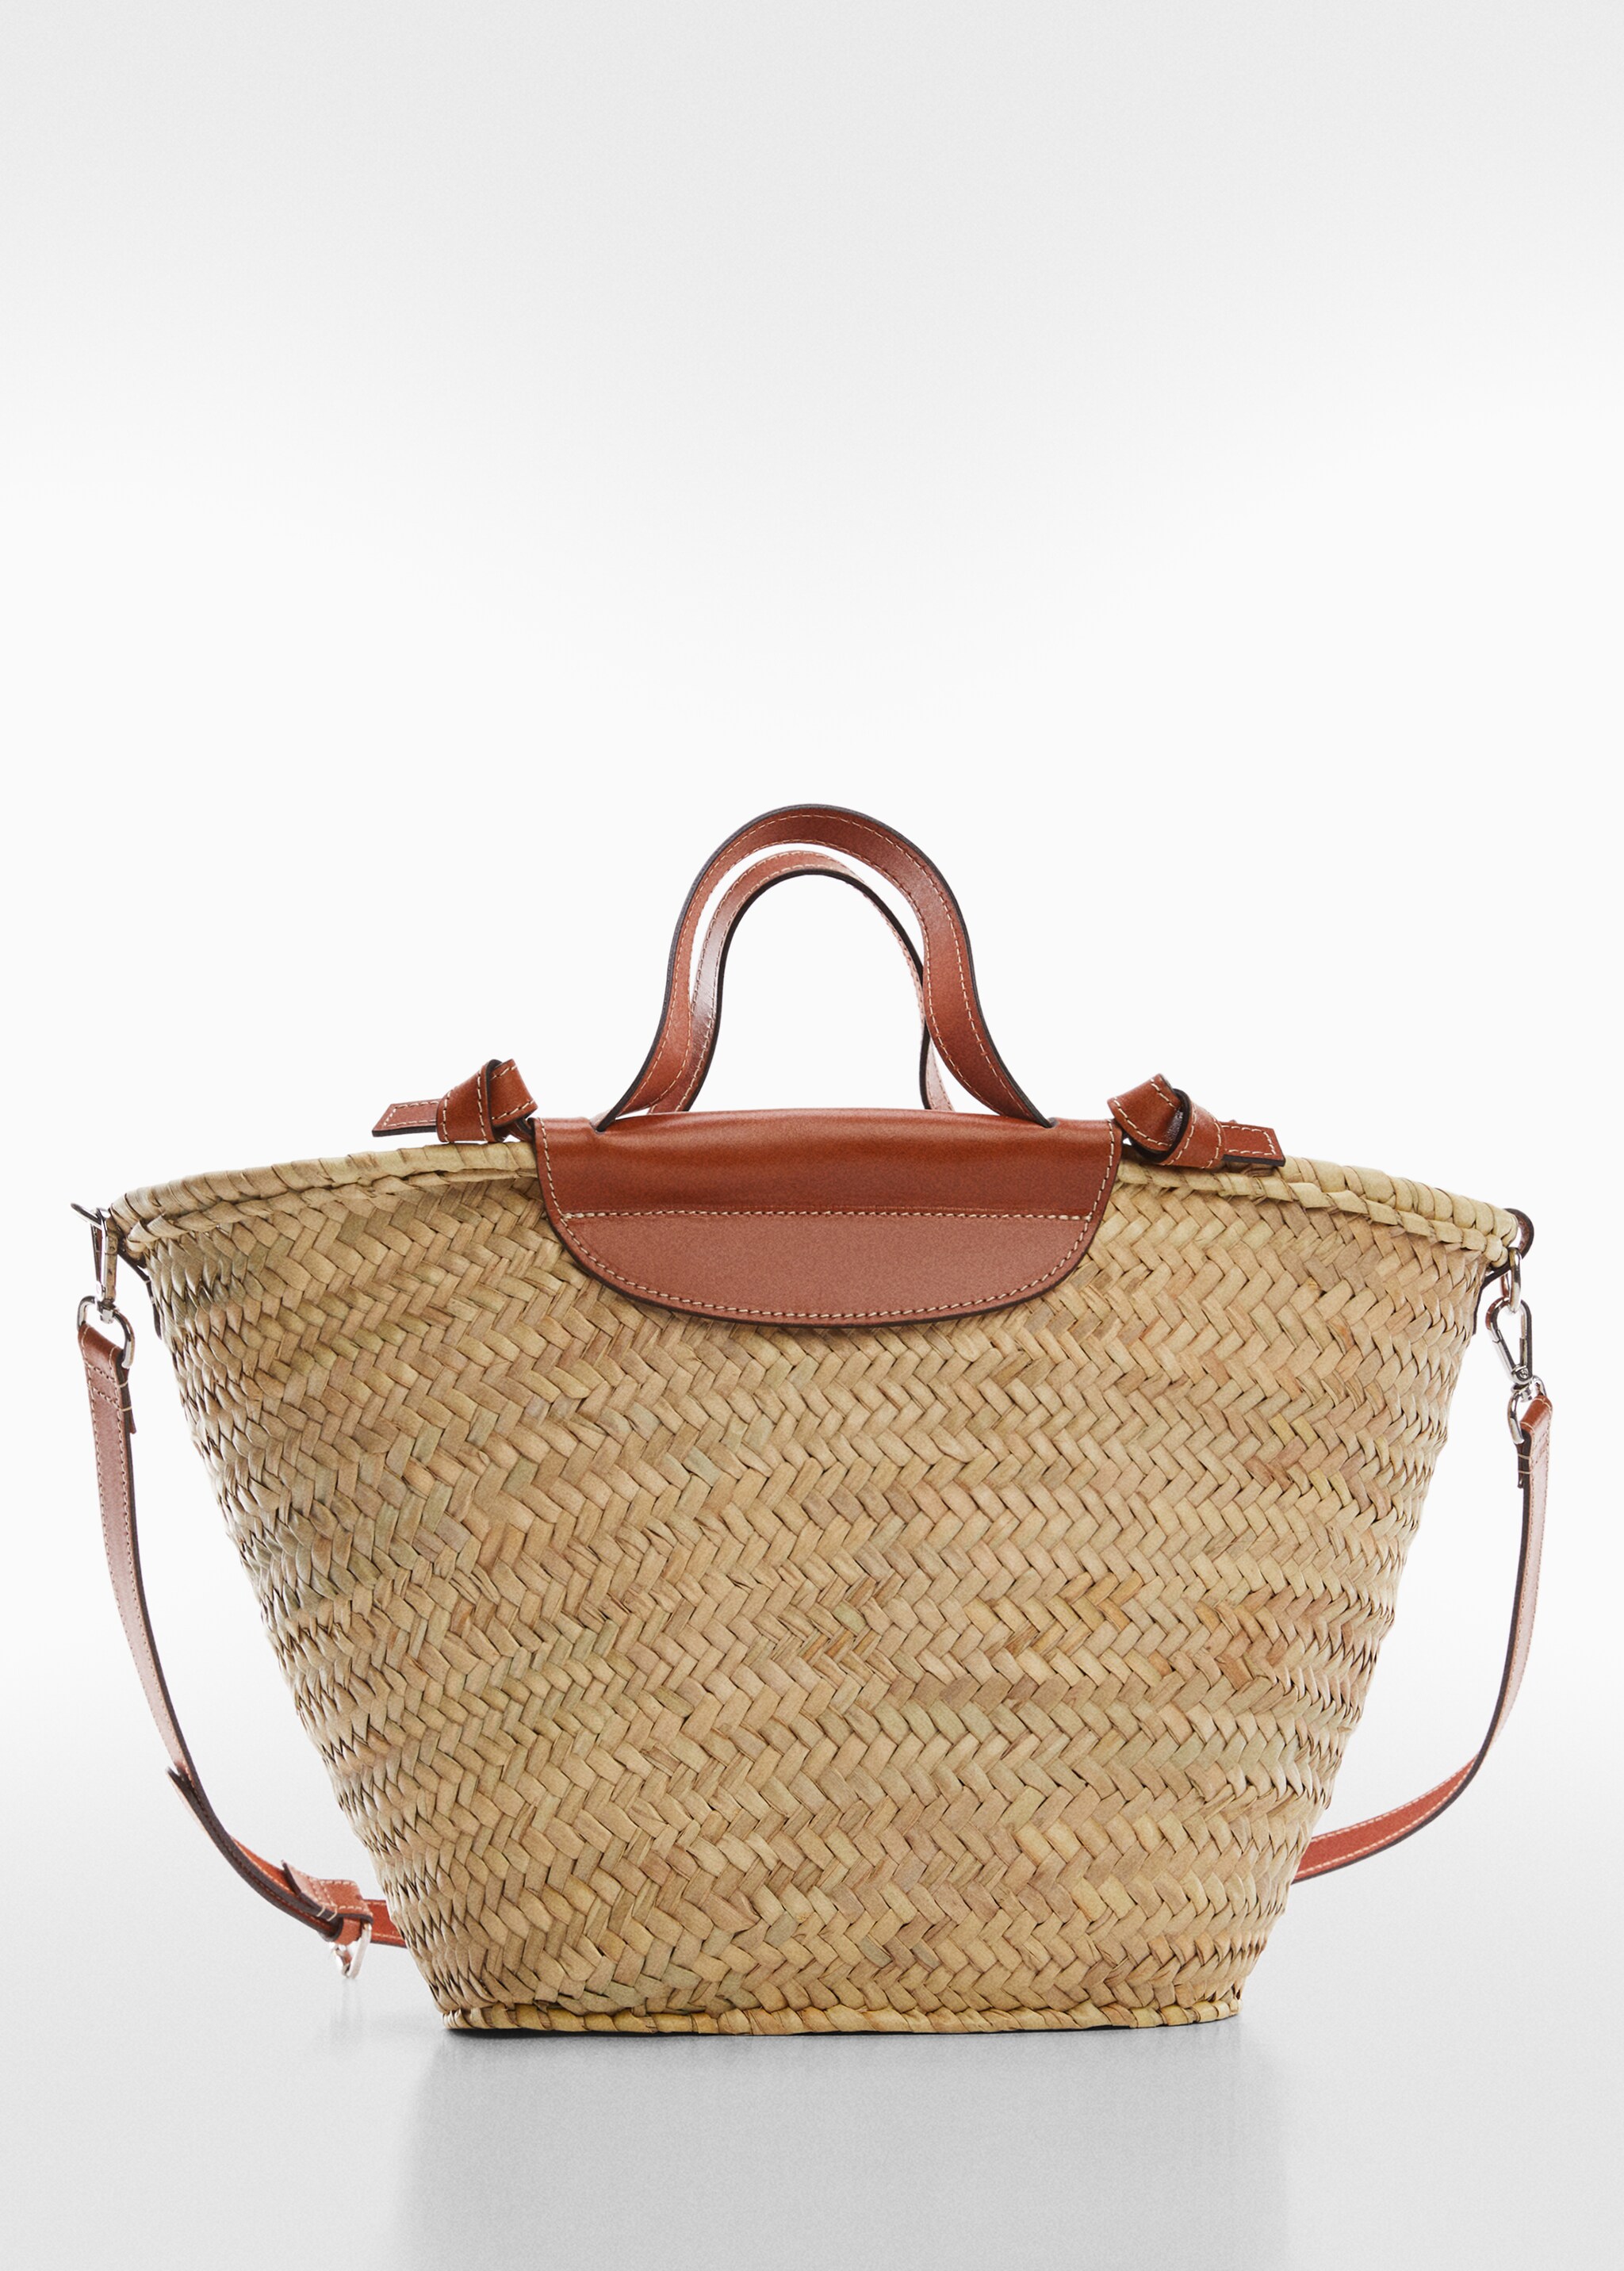 Raffia tote bag - Article without model